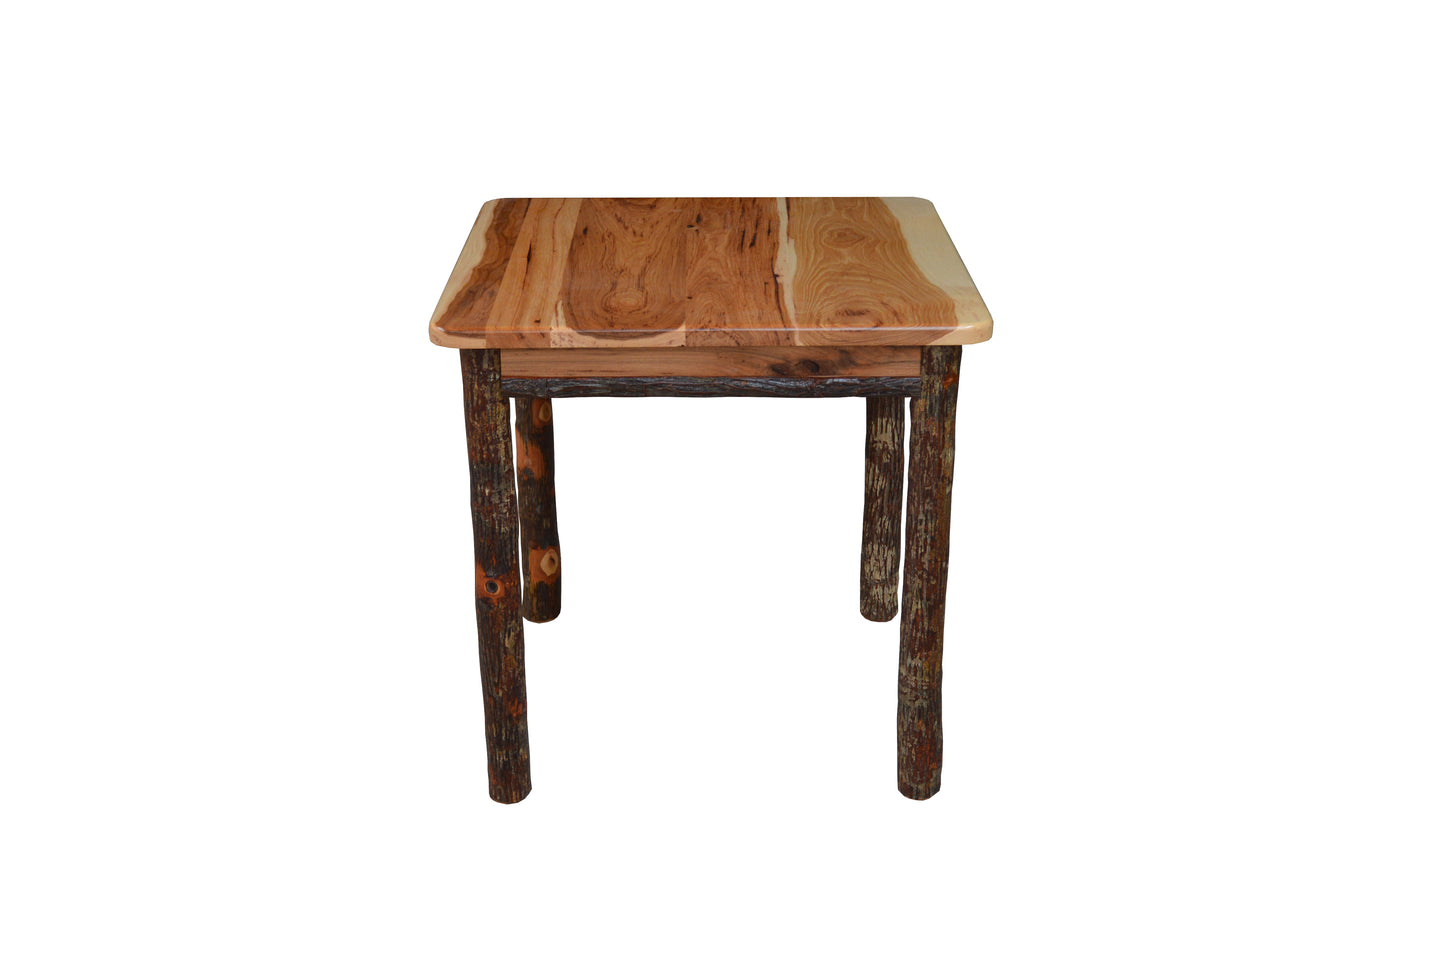 A&L Furniture Co. Hickory Solid Wood End Table - LEAD TIME TO SHIP 10 BUSINESS DAYS